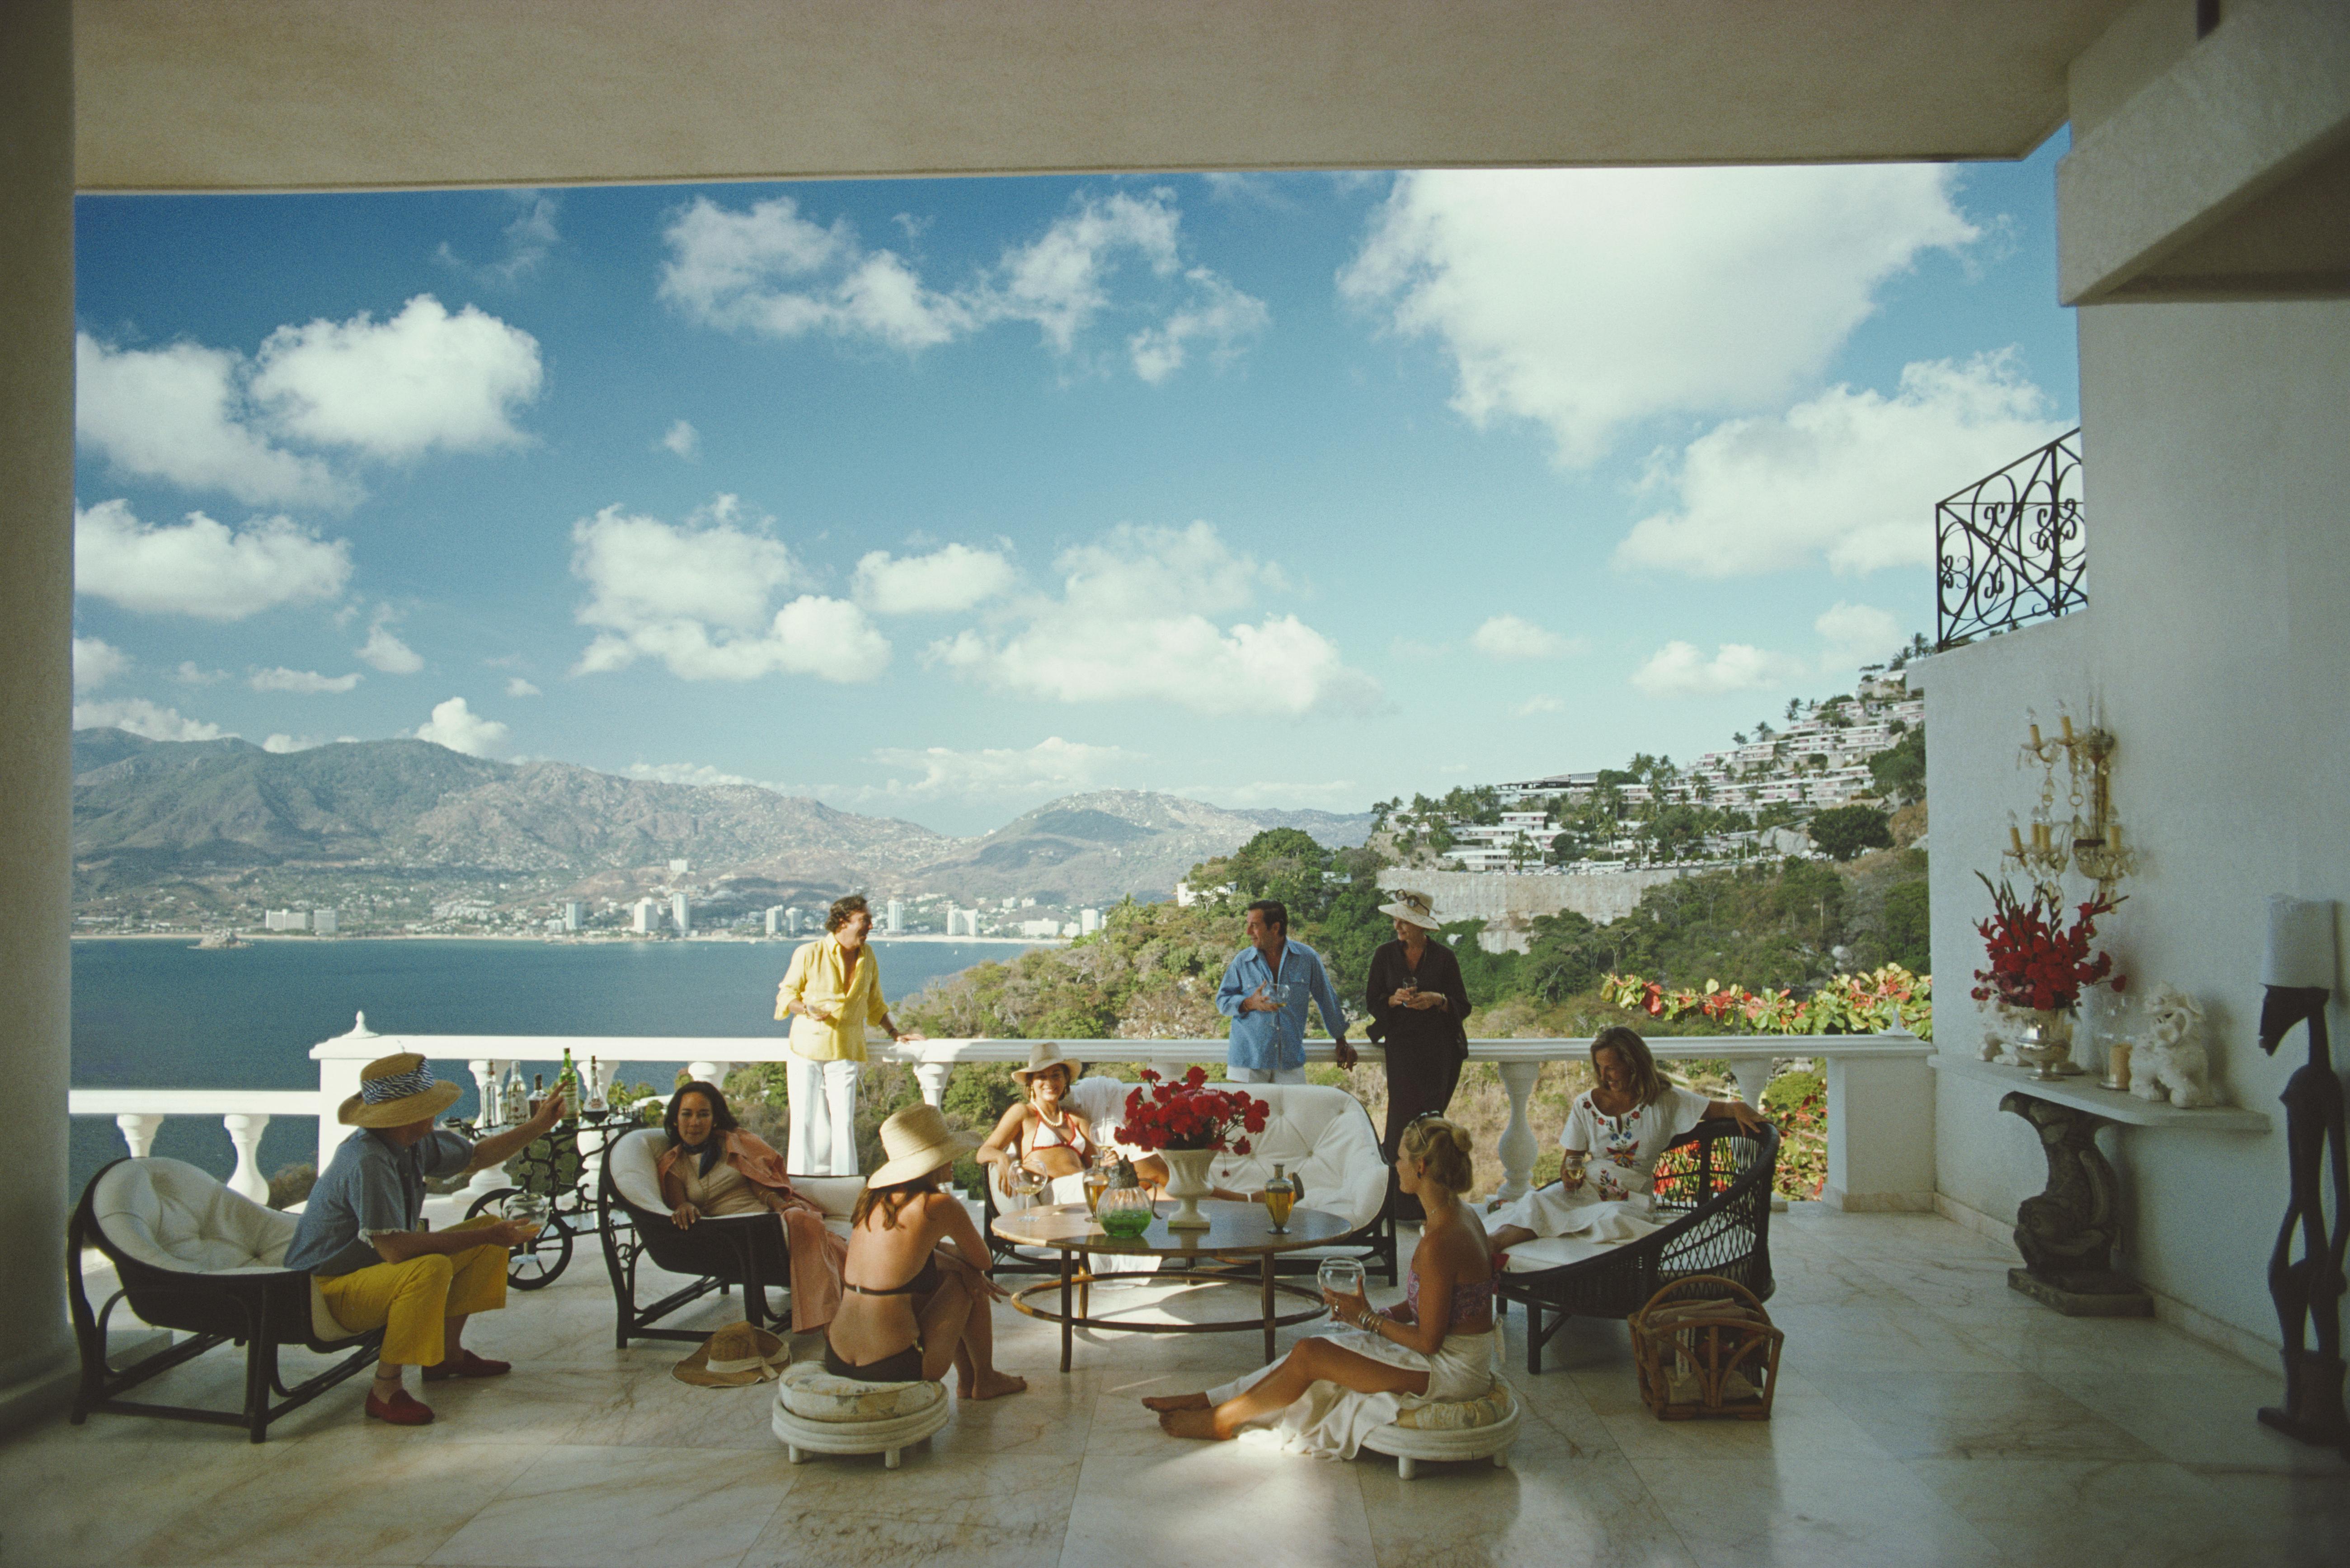  'Guests At Villa Nirvana' 1978 Slim Aarons Limited Estate Edition

Guests at the Villa Nirvana, owned by Oscar Obregon, in Las Brisas, Acapulco, Mexico, 1978. 

Produced from the original transparency
Certificate of authenticity supplied 
30x40